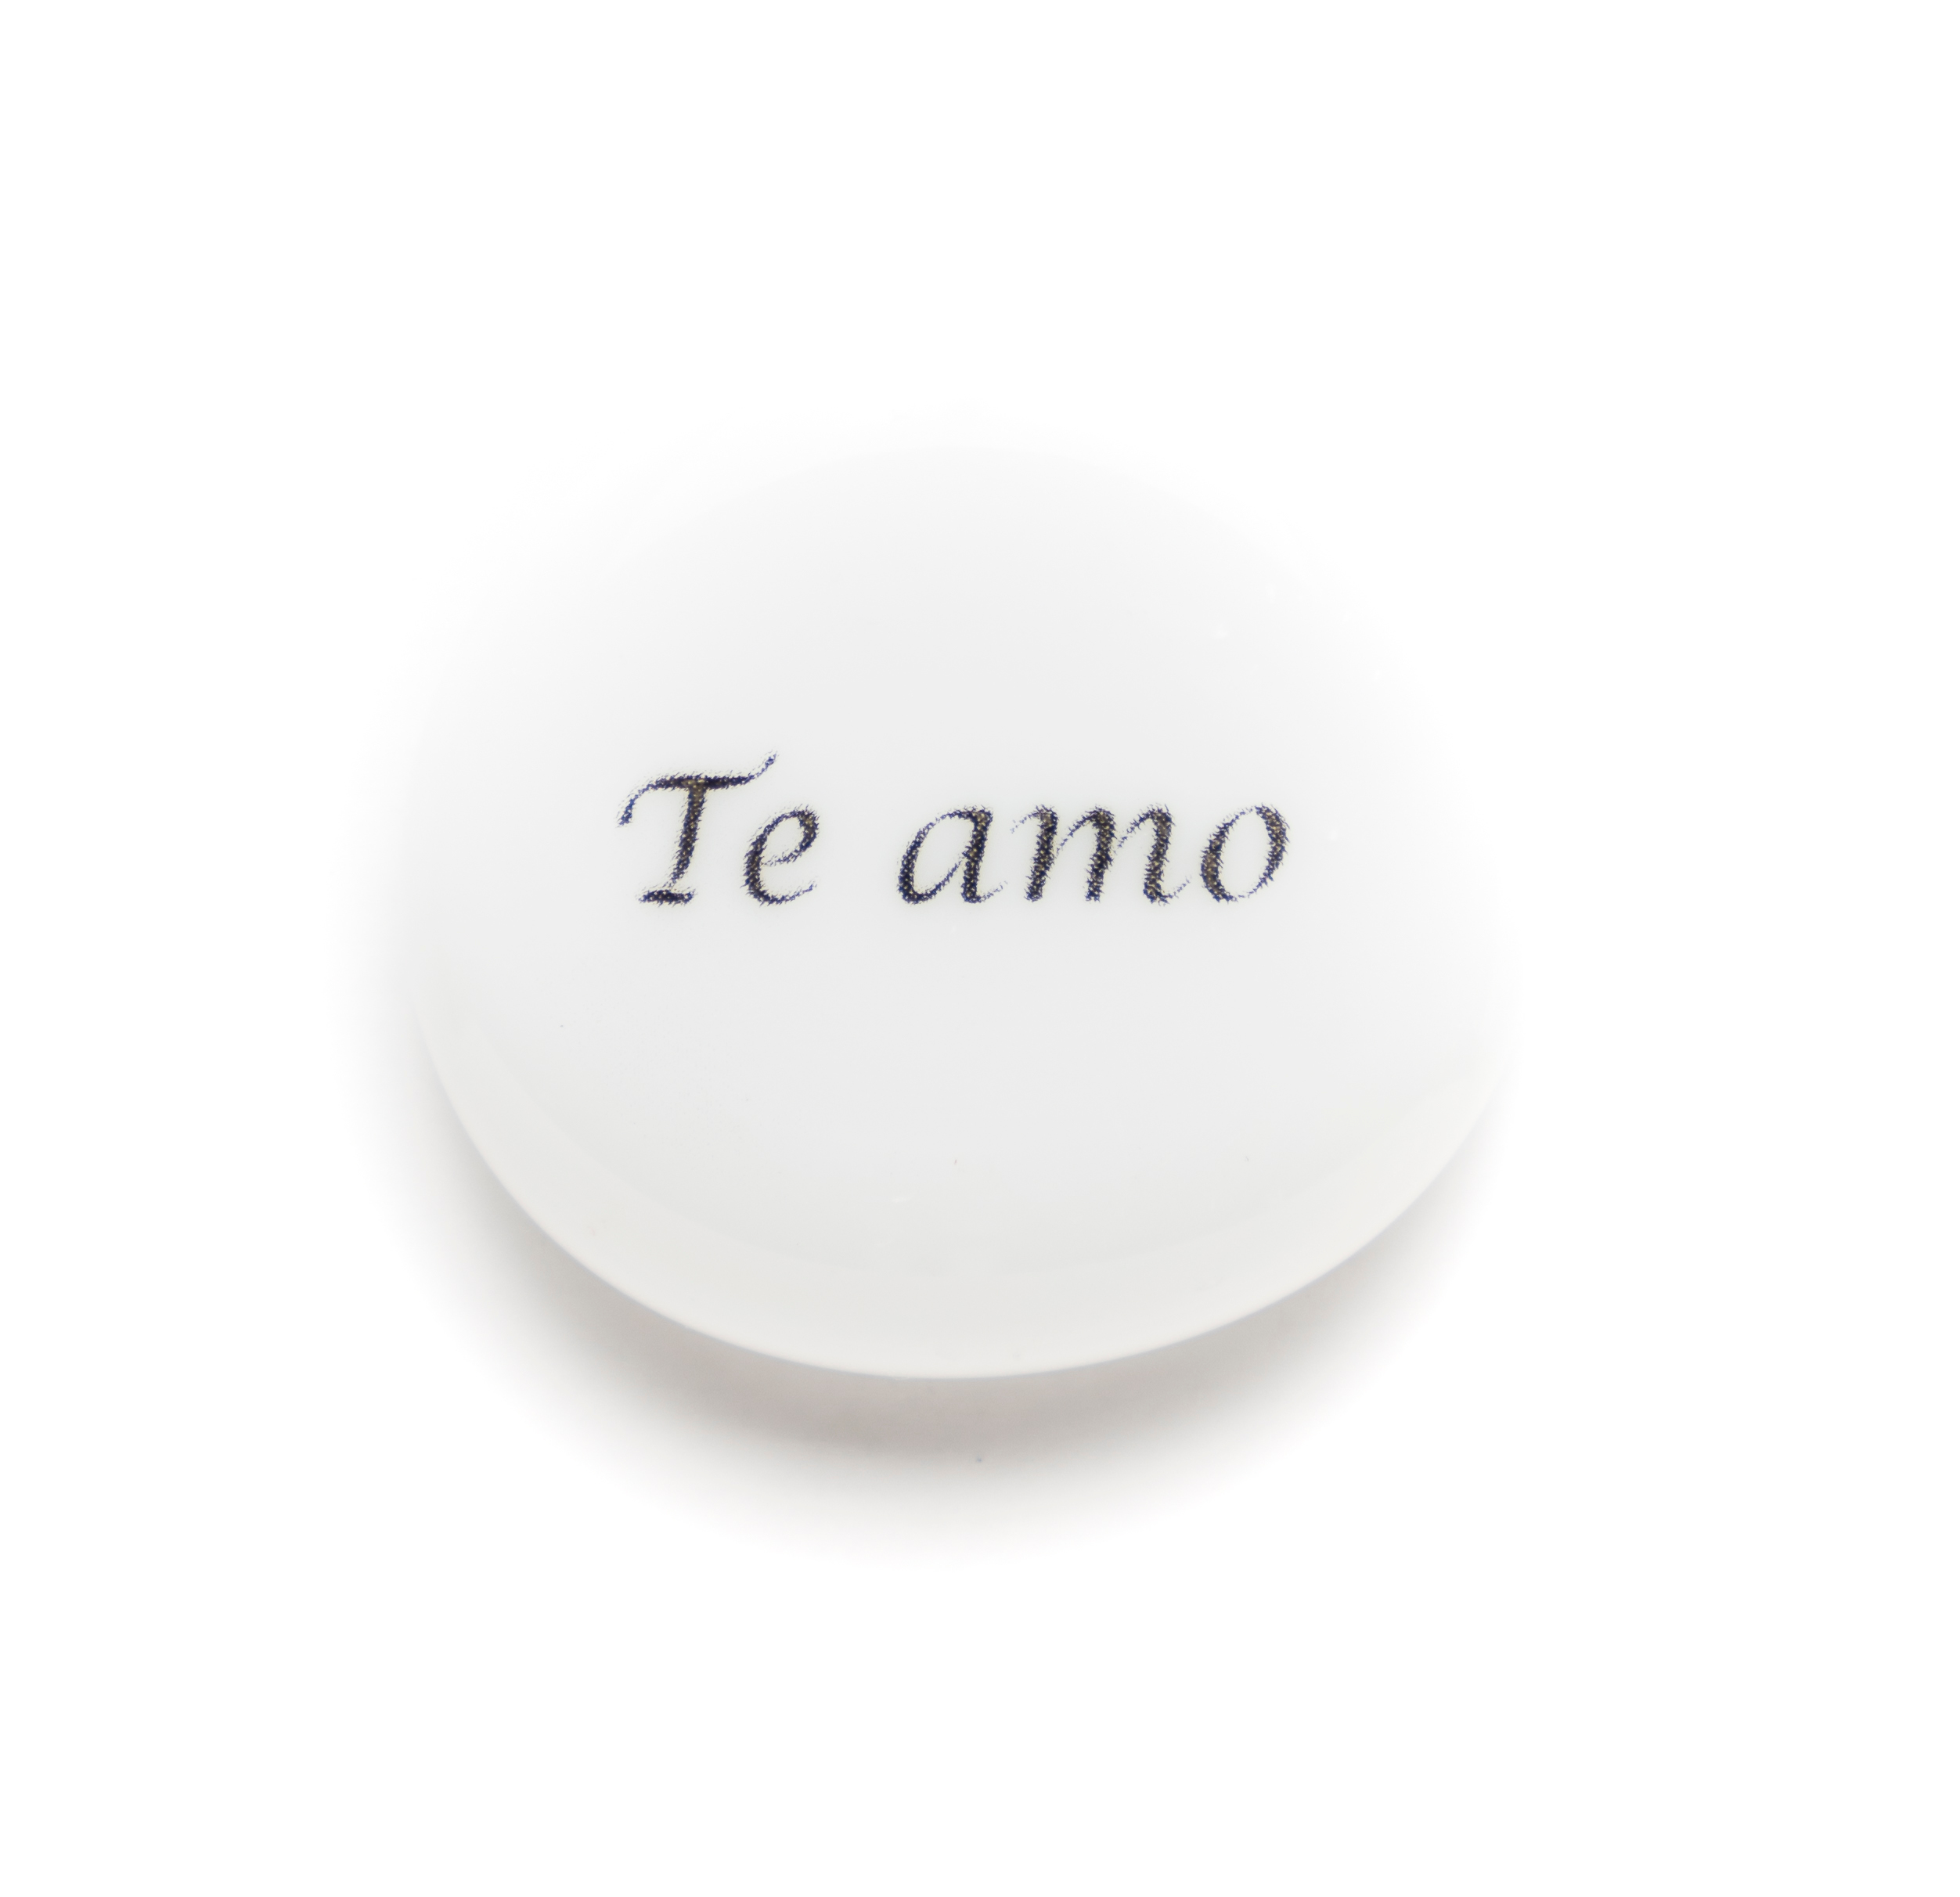 i love you in spanish quotes